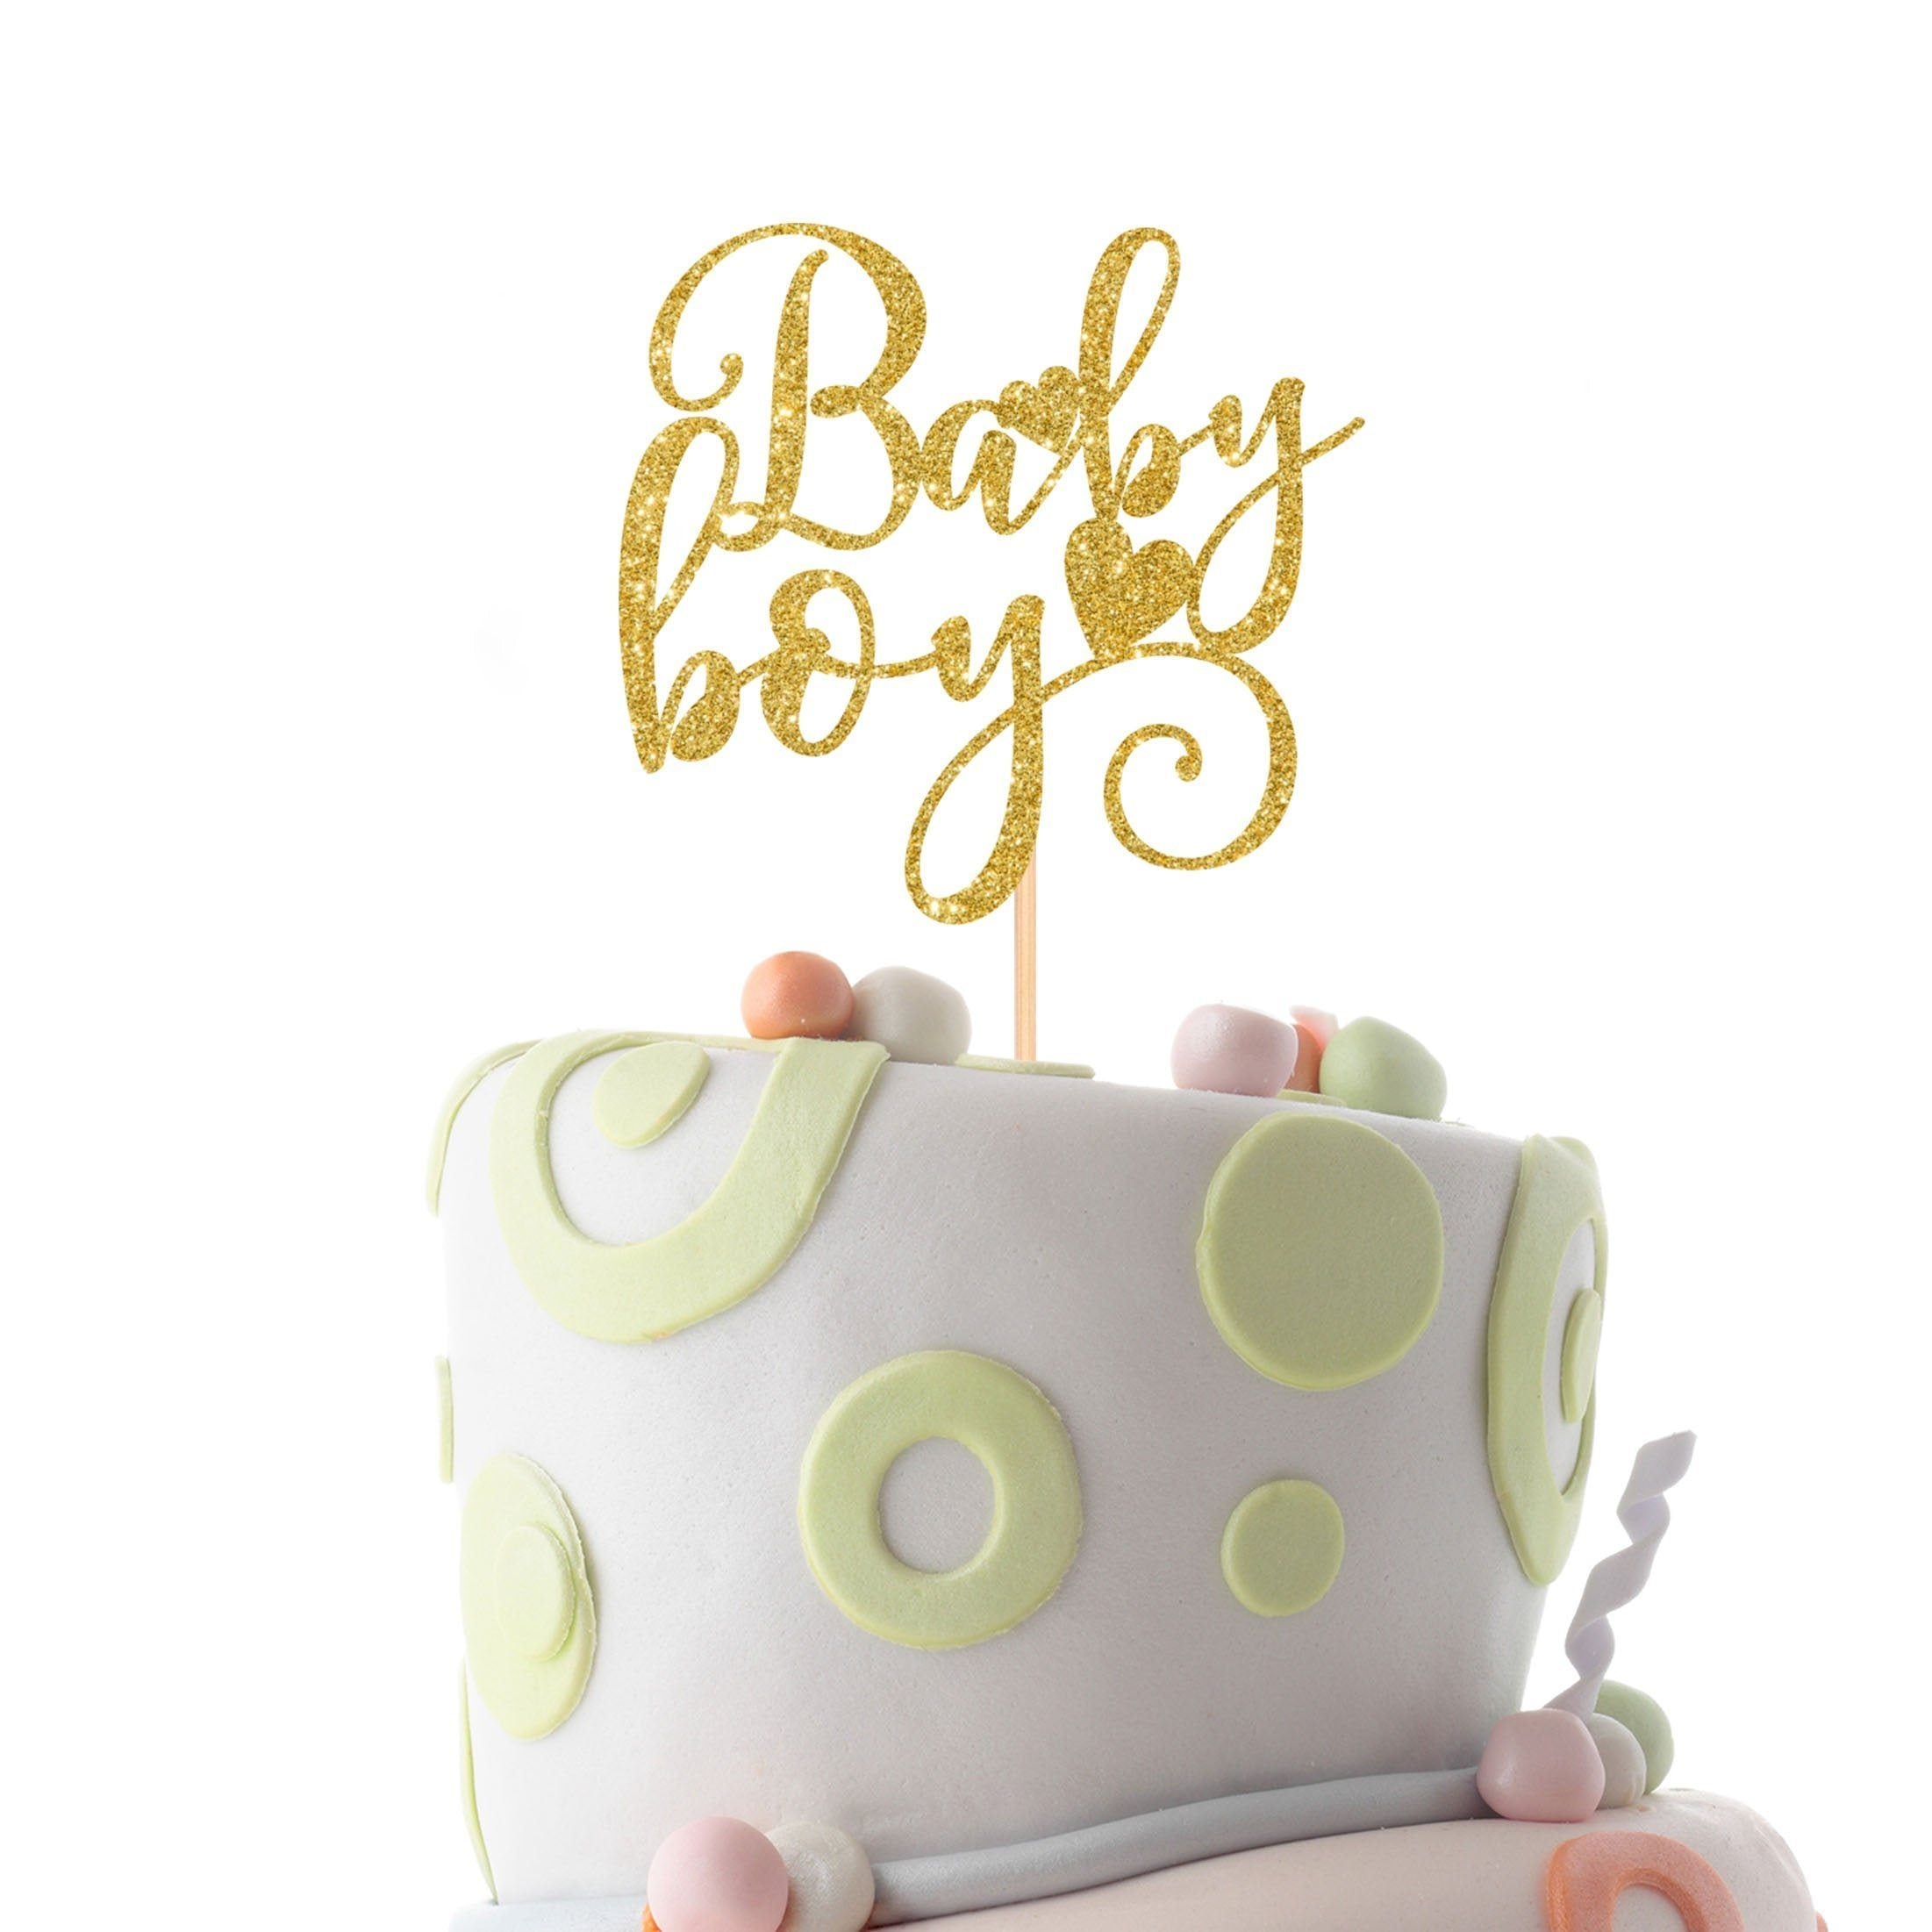 Baby boy cake topper. Baby shower cake topper. Welcome baby boy party cake